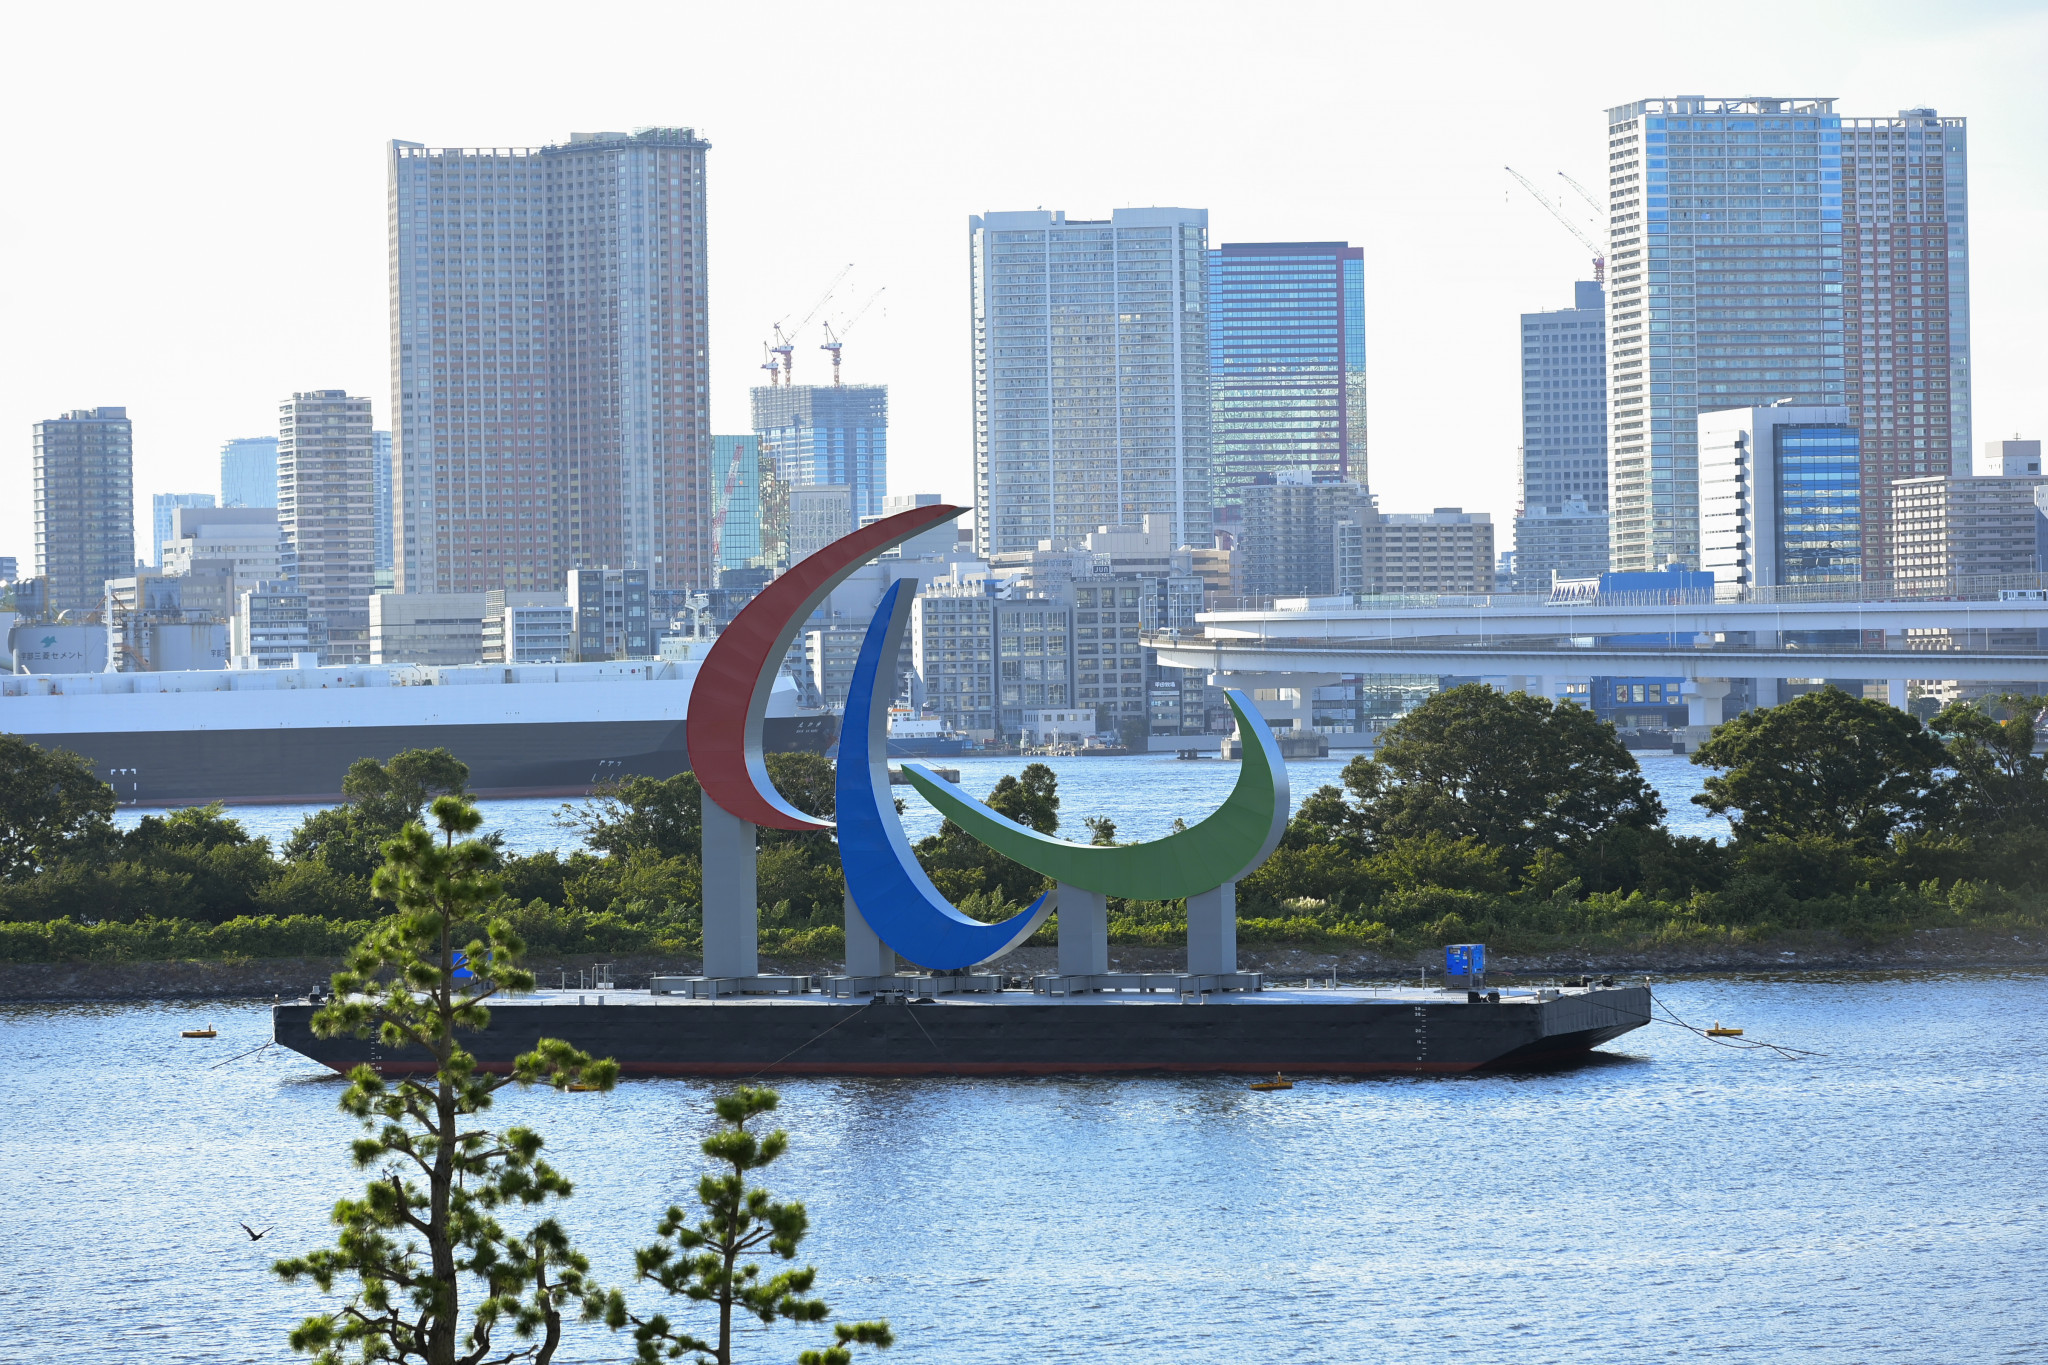 Agitos logo removed from Tokyo Bay following conclusion of Paralympic Games